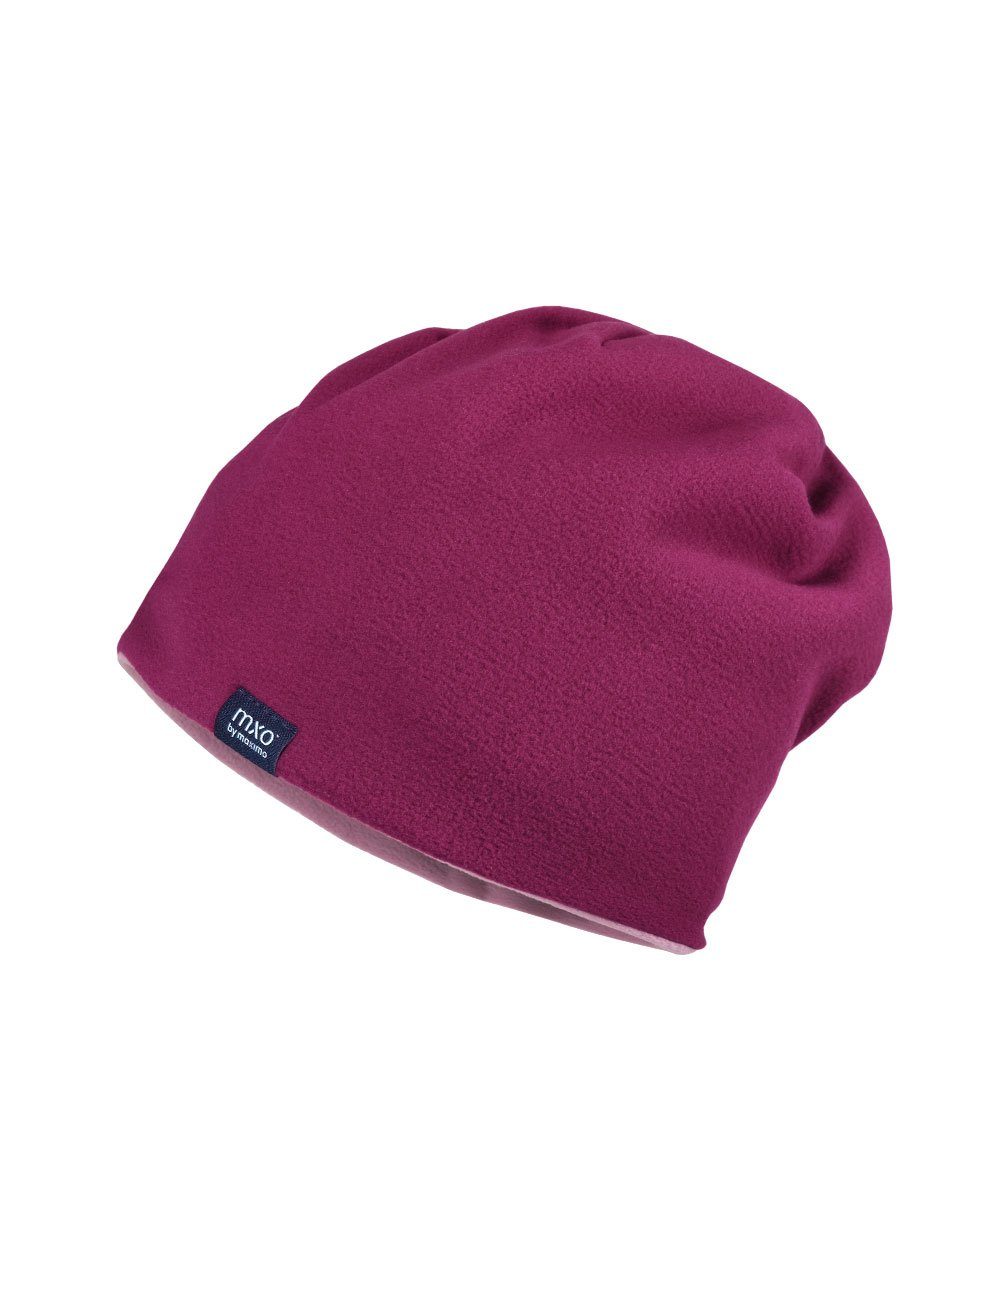 MAXIMO Beanie Beanie, Fleece brombeere/lilas Germany Made in two-one